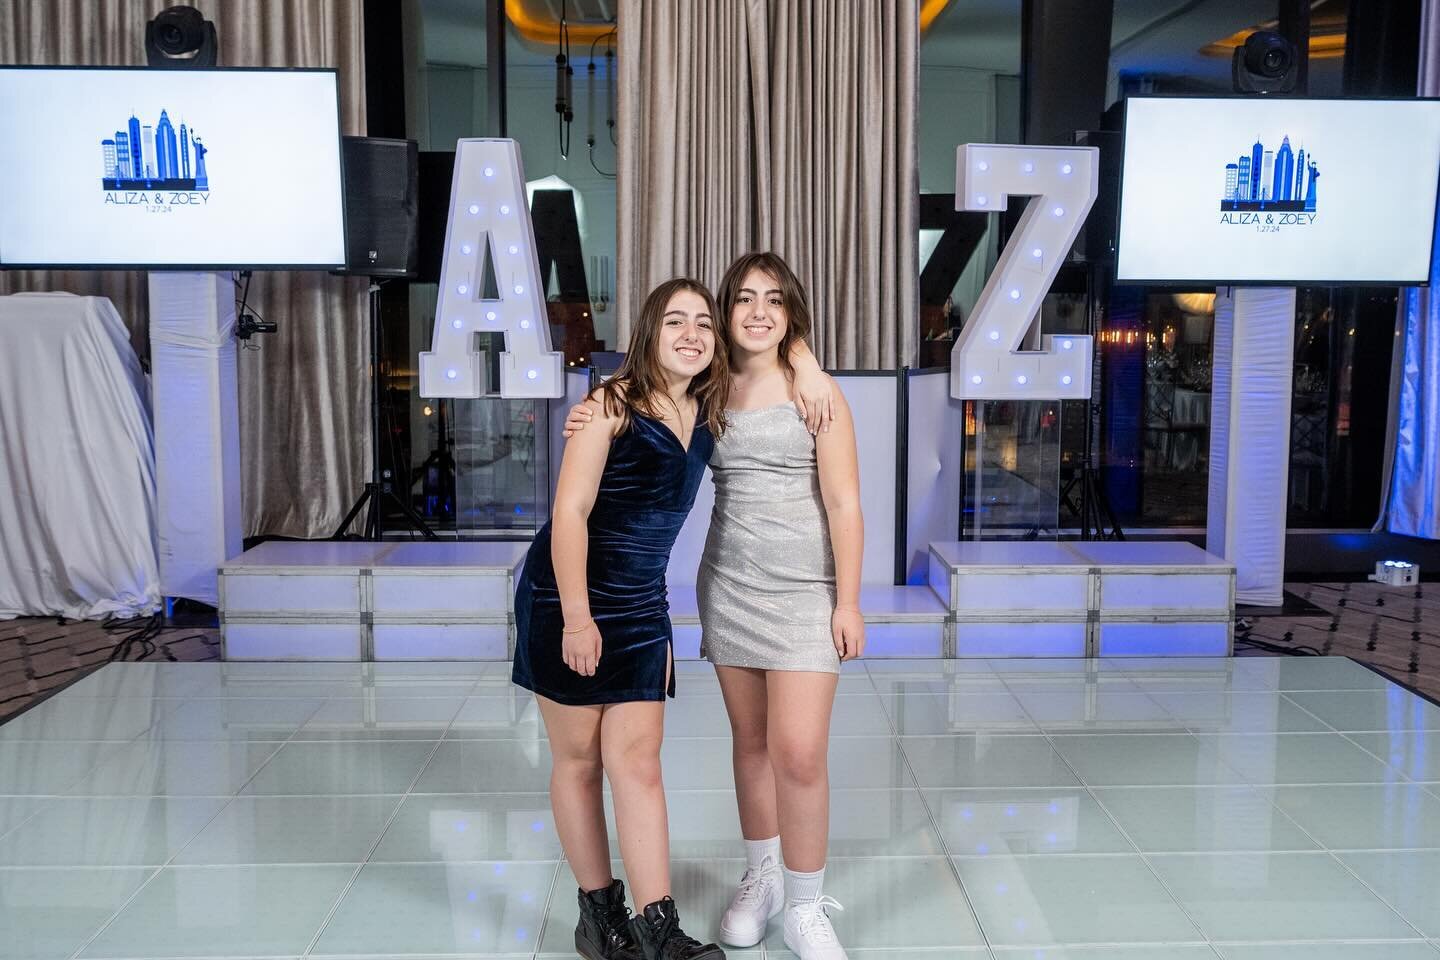 We love a great logo! From the backdrop to the bar signs and napkins, the logo reflects the guest of honor &amp; adds a fun design and customization to your event! (so lucky we have amazing graphic designers to work with)

#mitzvahdecor #mitzvahlogo 